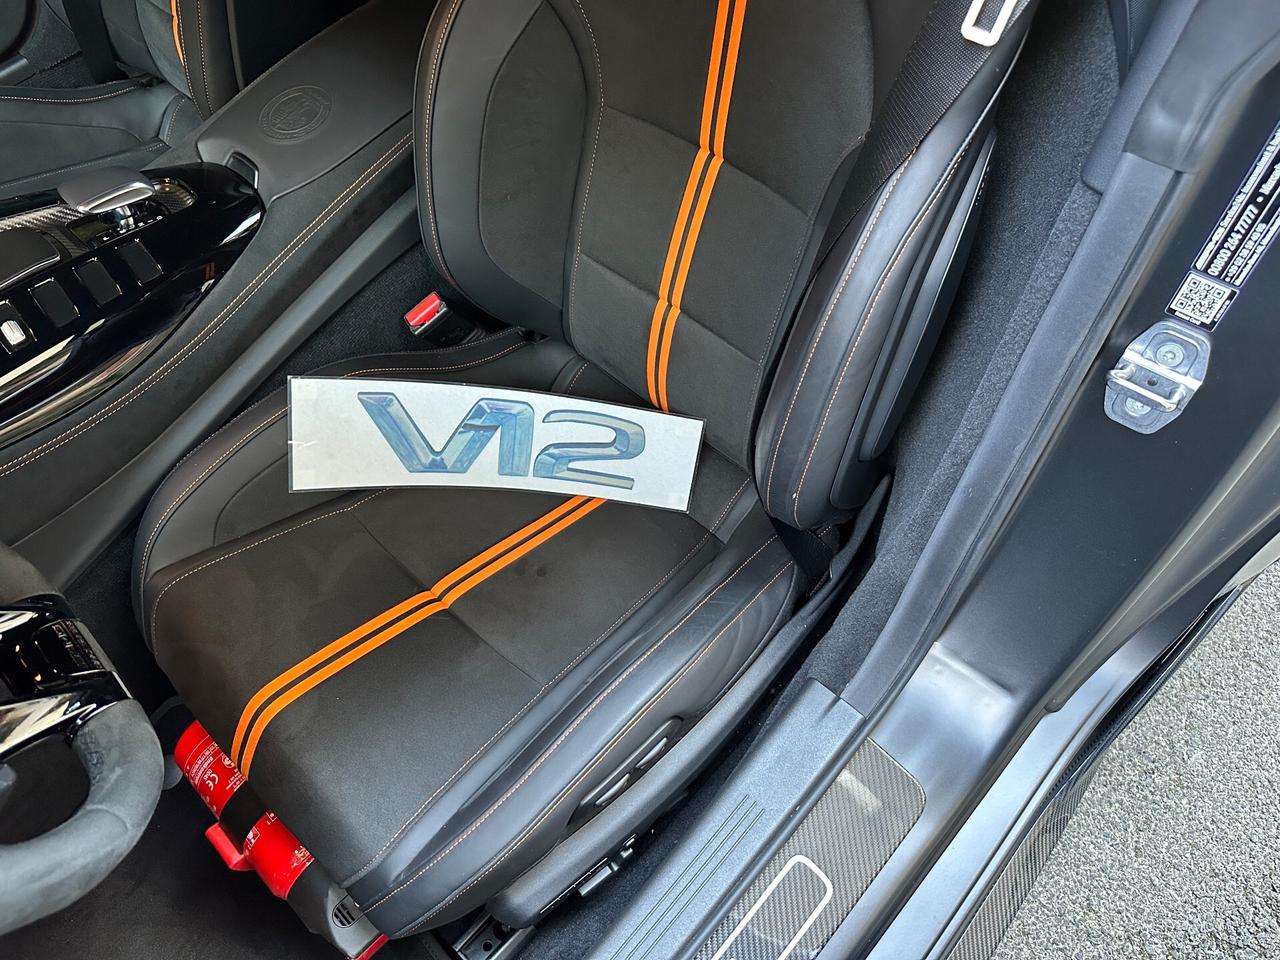 Mercedes-benz GT AMG GT AMG Black Series - IVA 22% - OK NETTO EXPORT - 1ST HAND